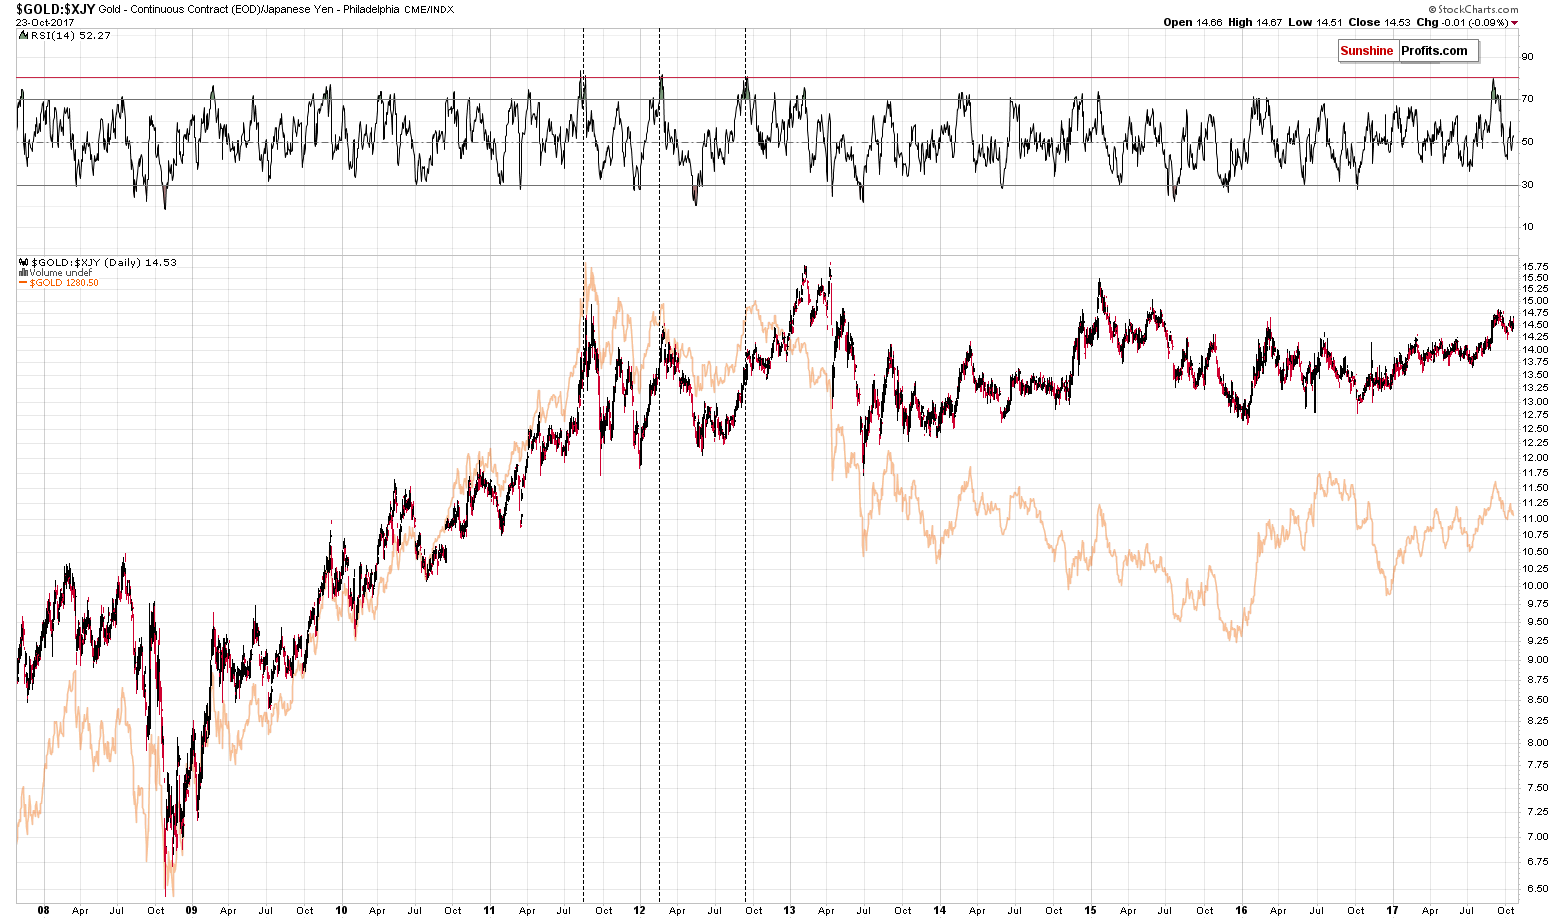 GOLD:XJY - Gold priced in Japanese yen